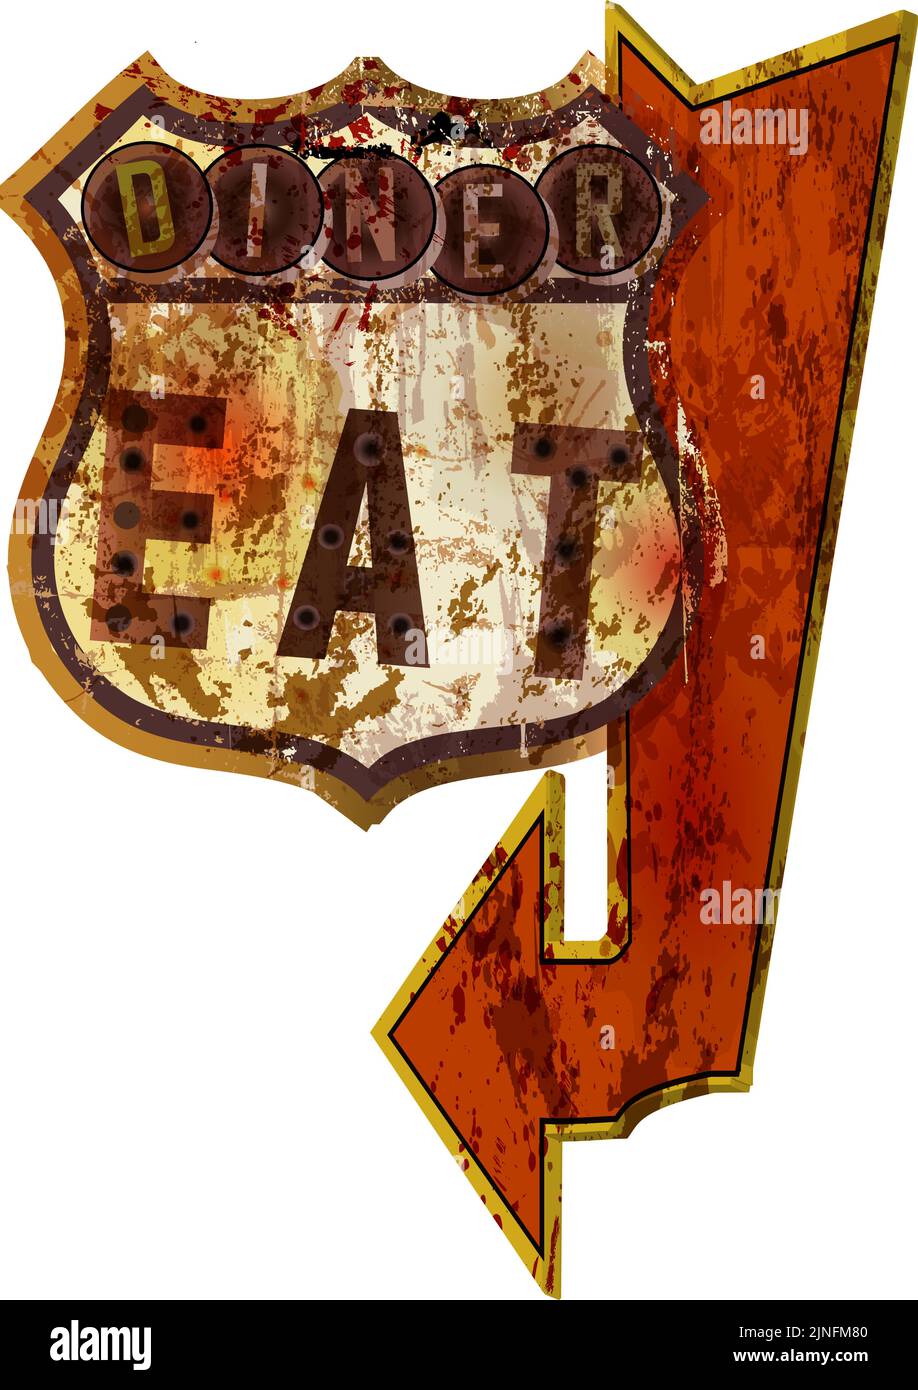 super grungy vintage diner sign,heavily rusted and damaged retro style, vector illustration Stock Vector